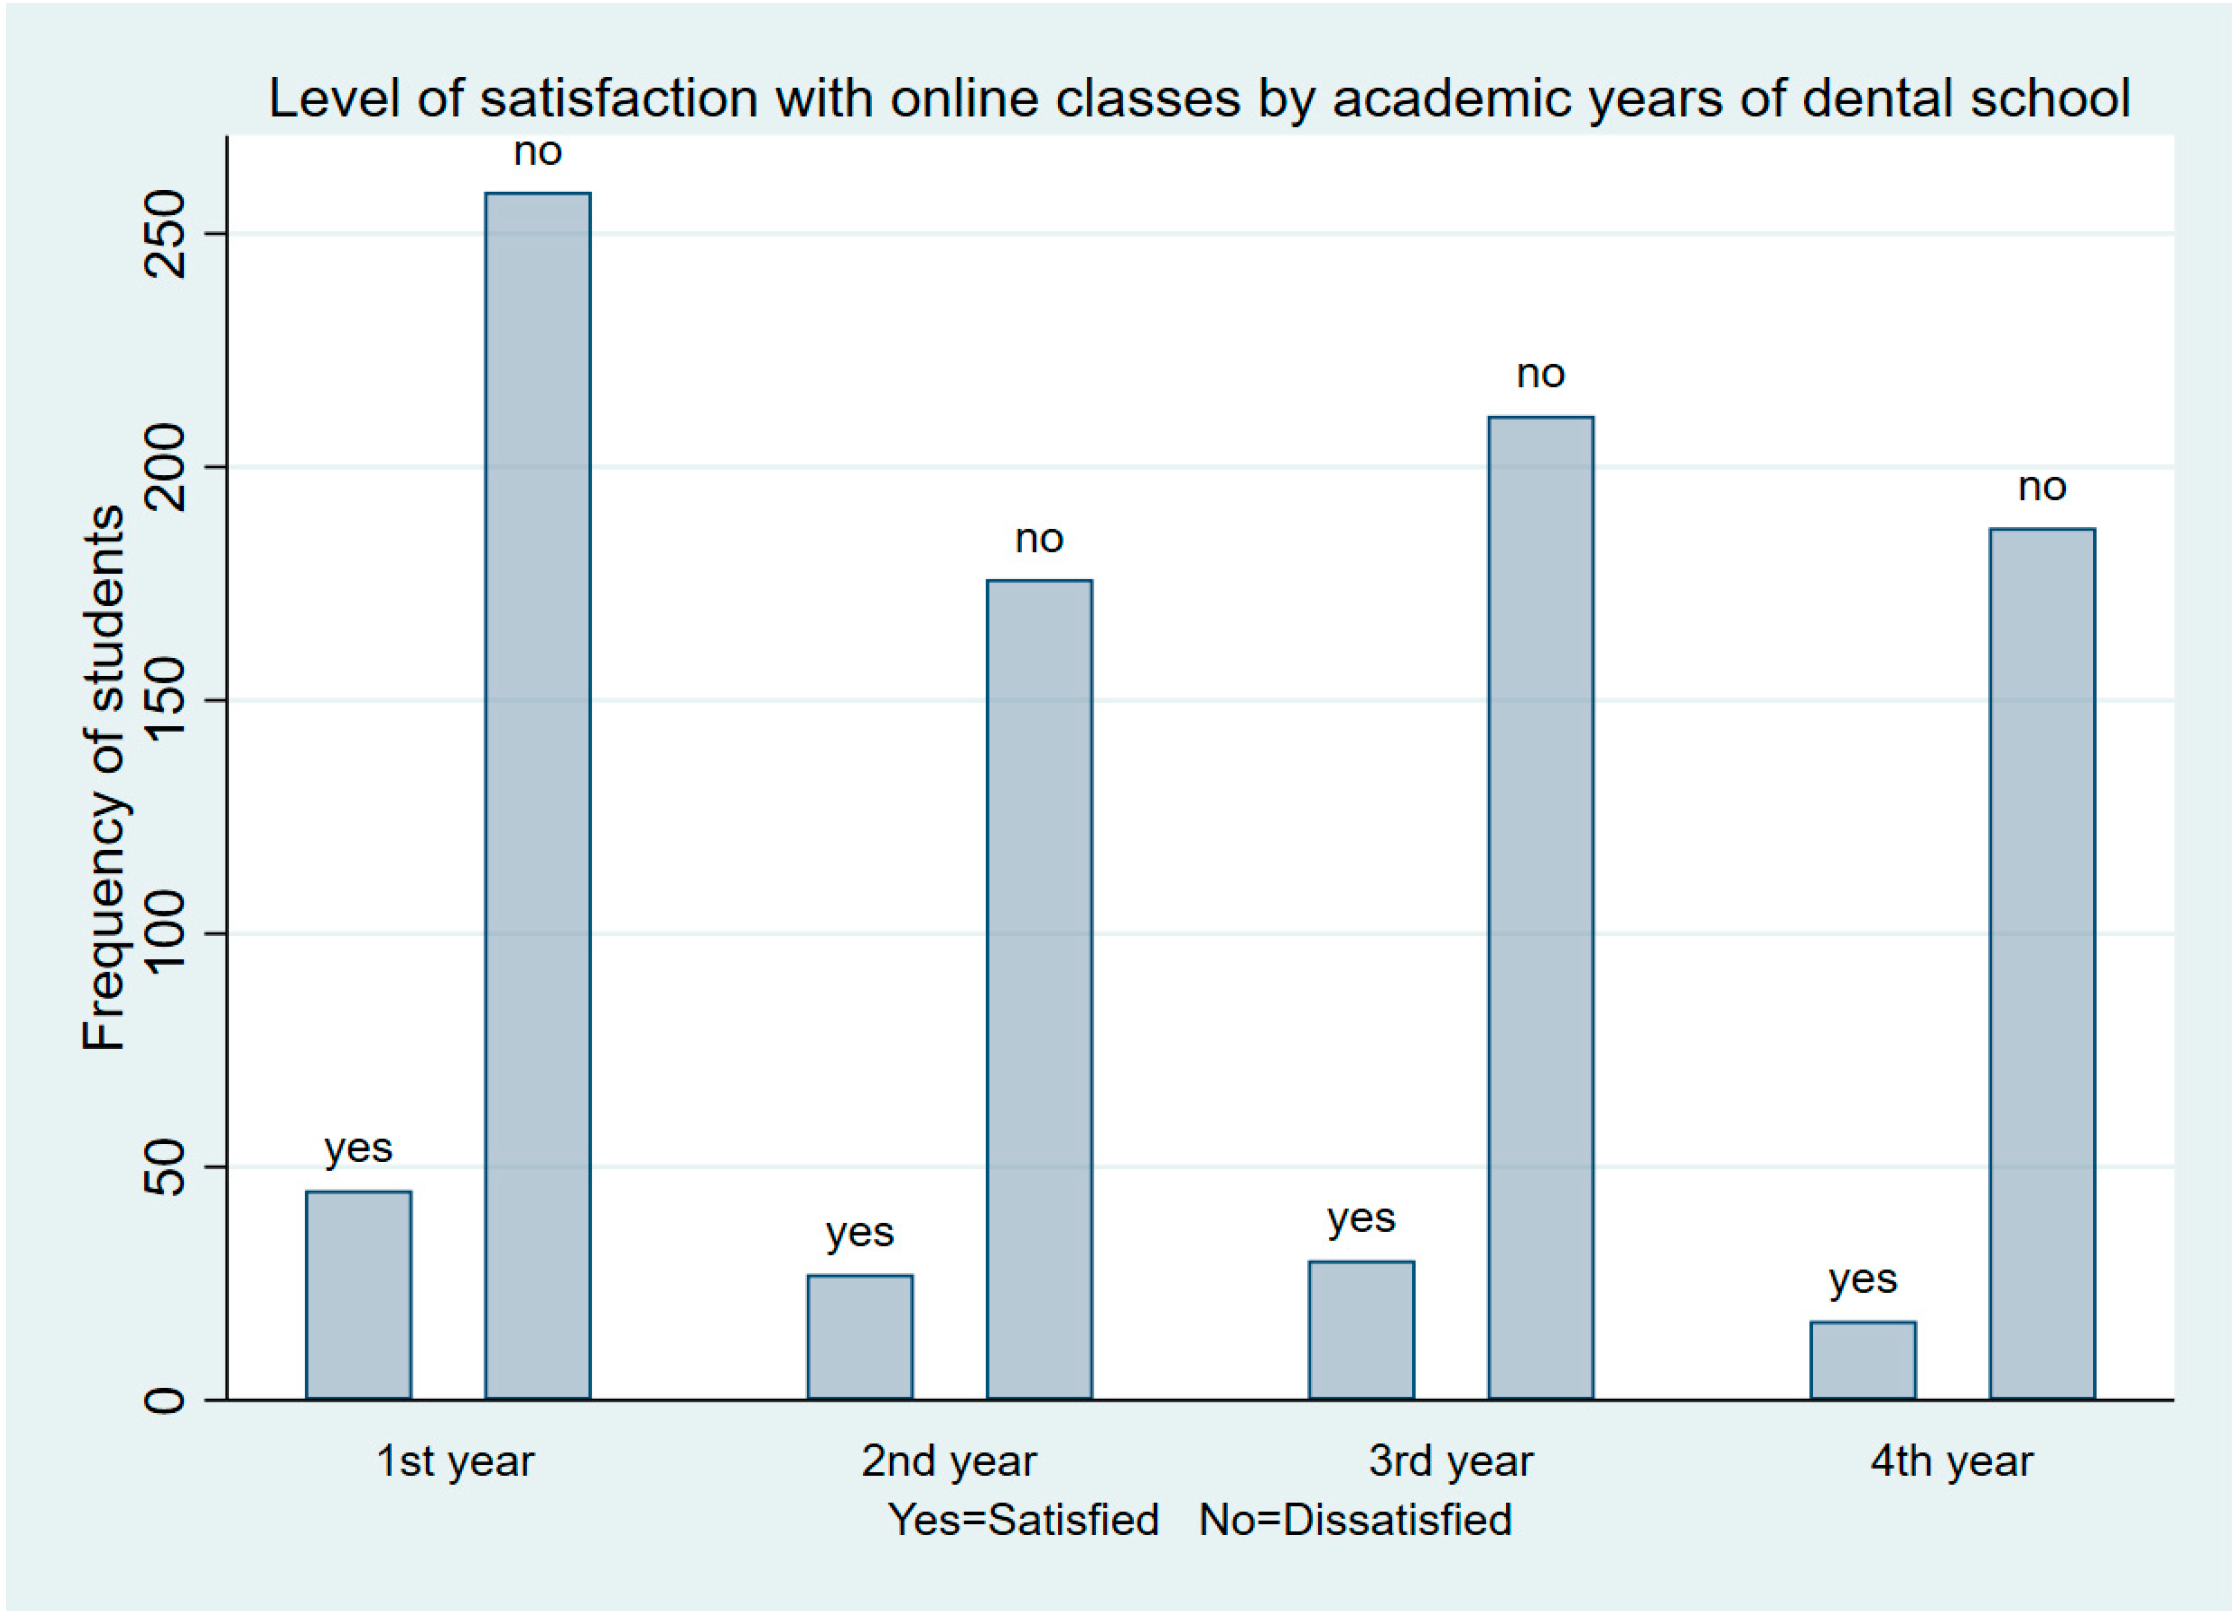 IJERPH | Free Full-Text | Experience of Bangladeshi Dental Students towards  Online Learning during the COVID-19 Pandemic: A Web-Based Cross-Sectional  Study